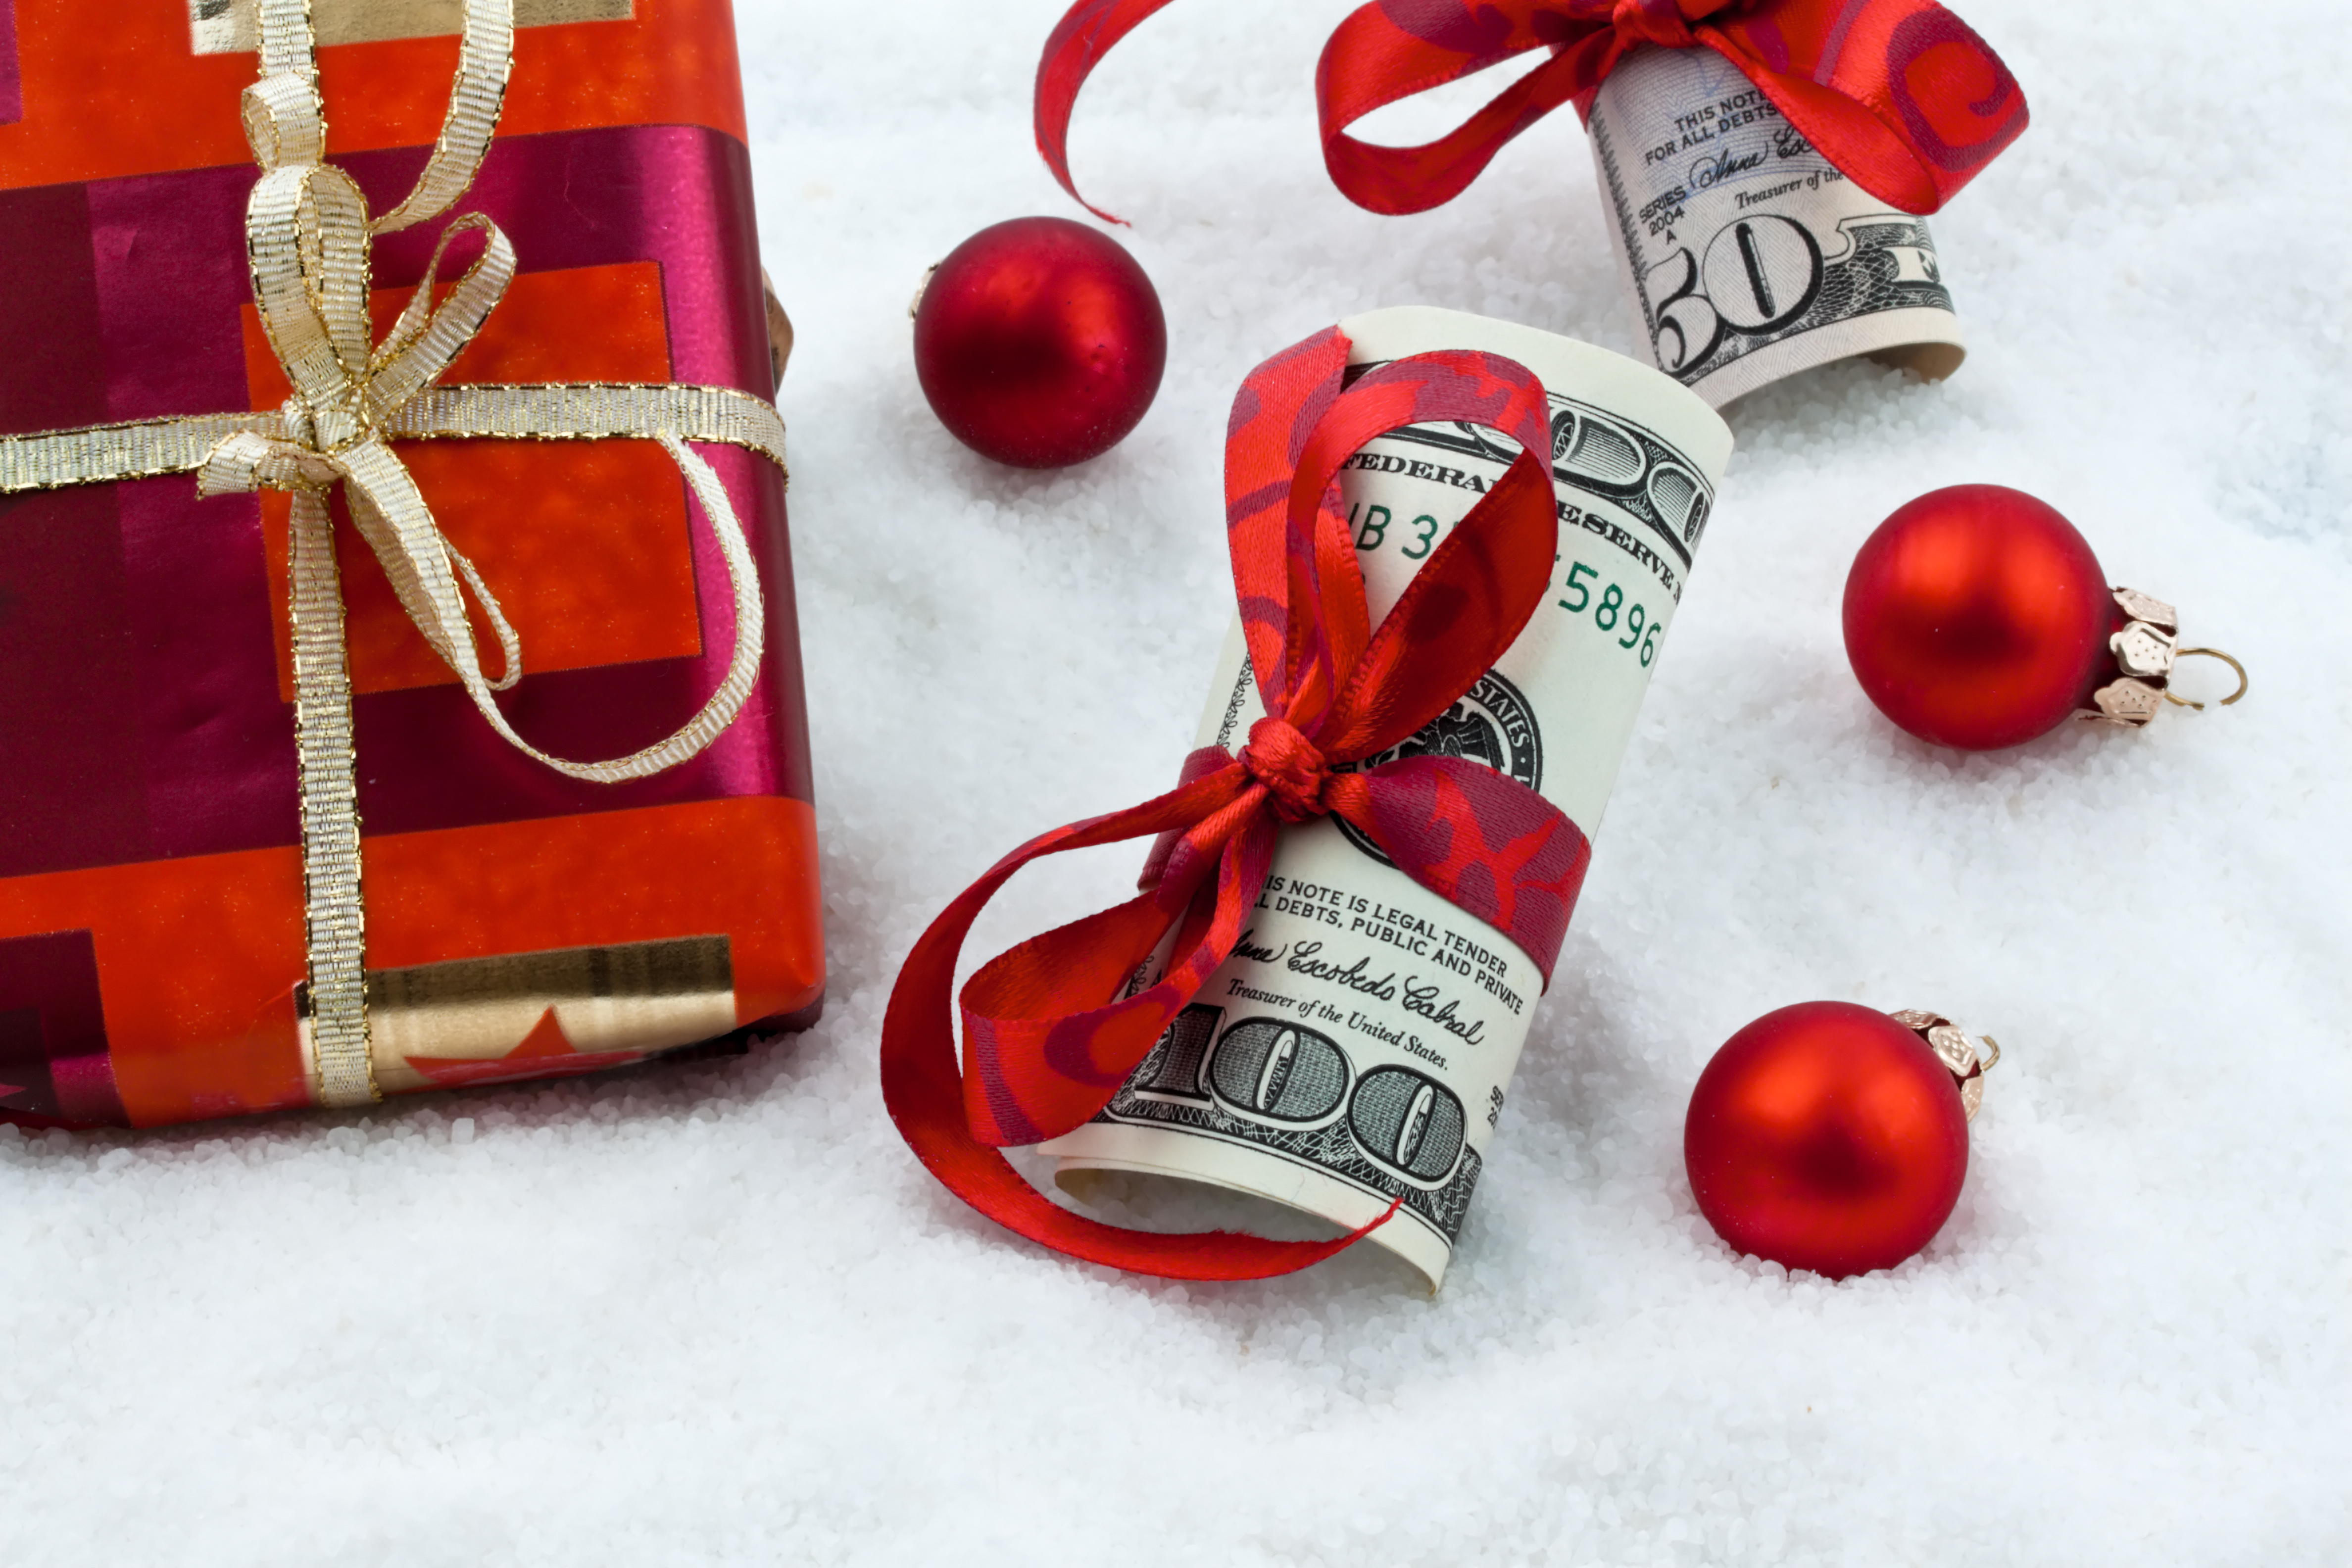 Sunset Finance - Ways to Save During the Holidays